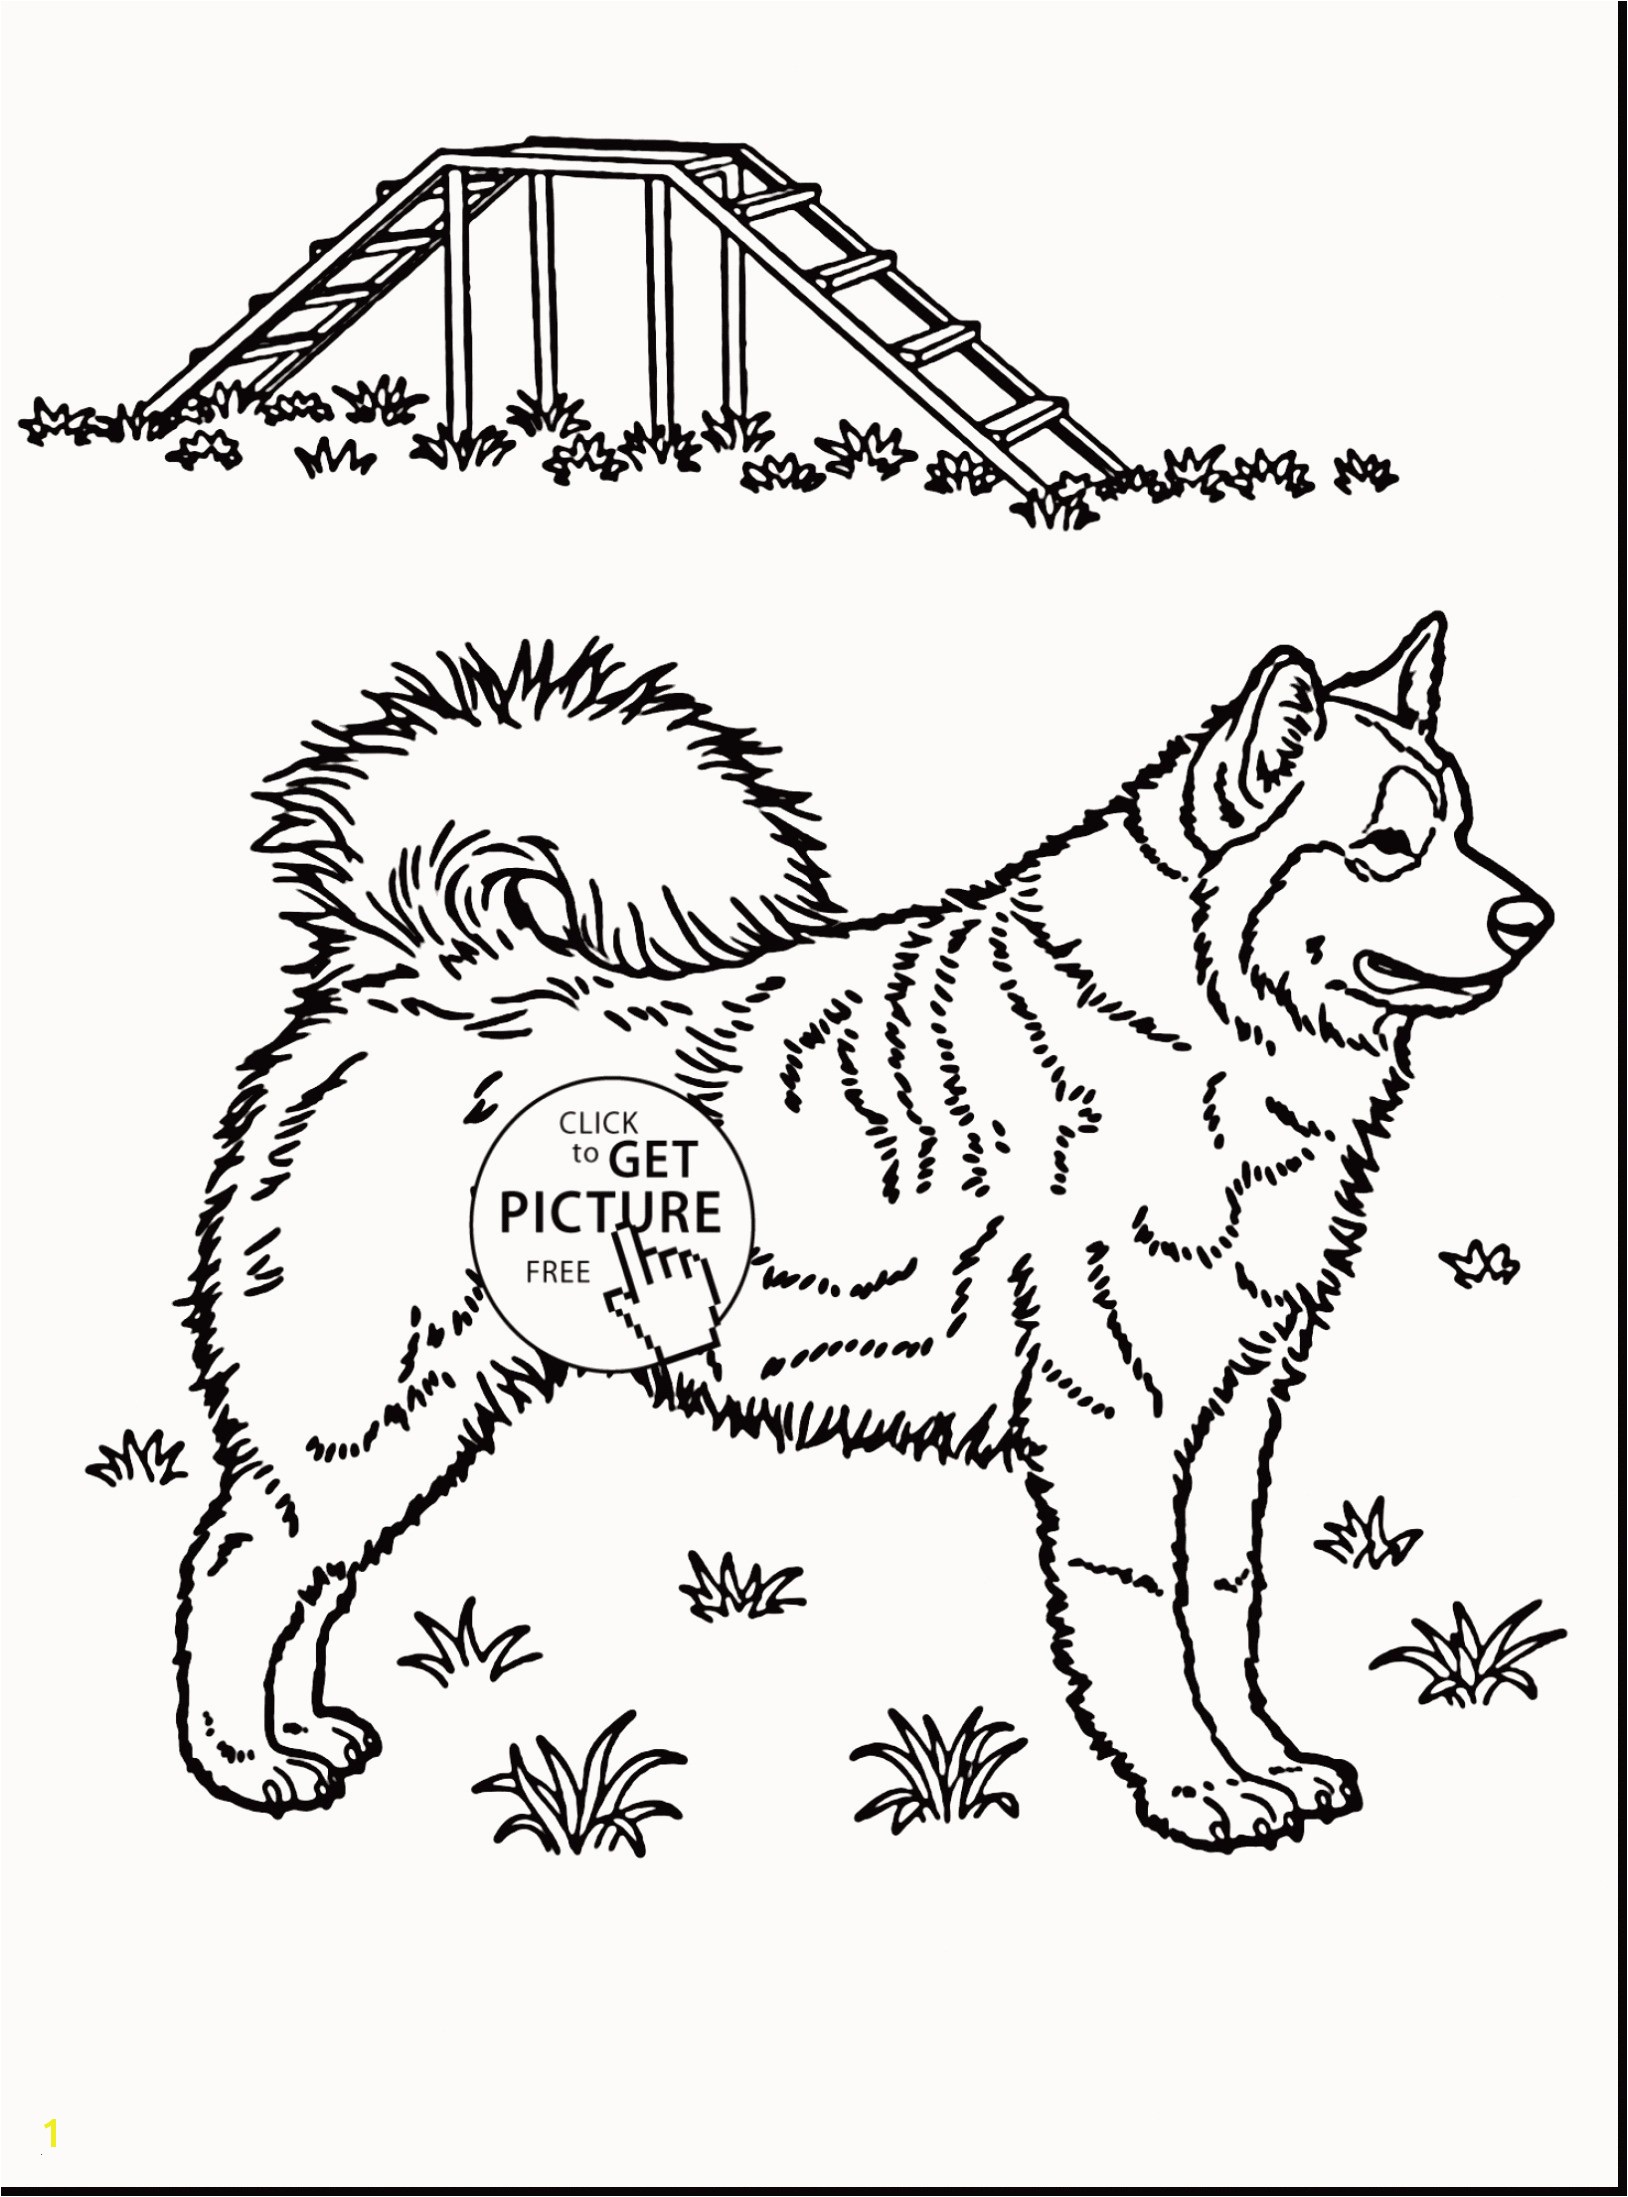 Coloring Pages Horses Free Awesome Husky Coloring Pages Beautiful Husky Coloring 0d Free Coloring Pages